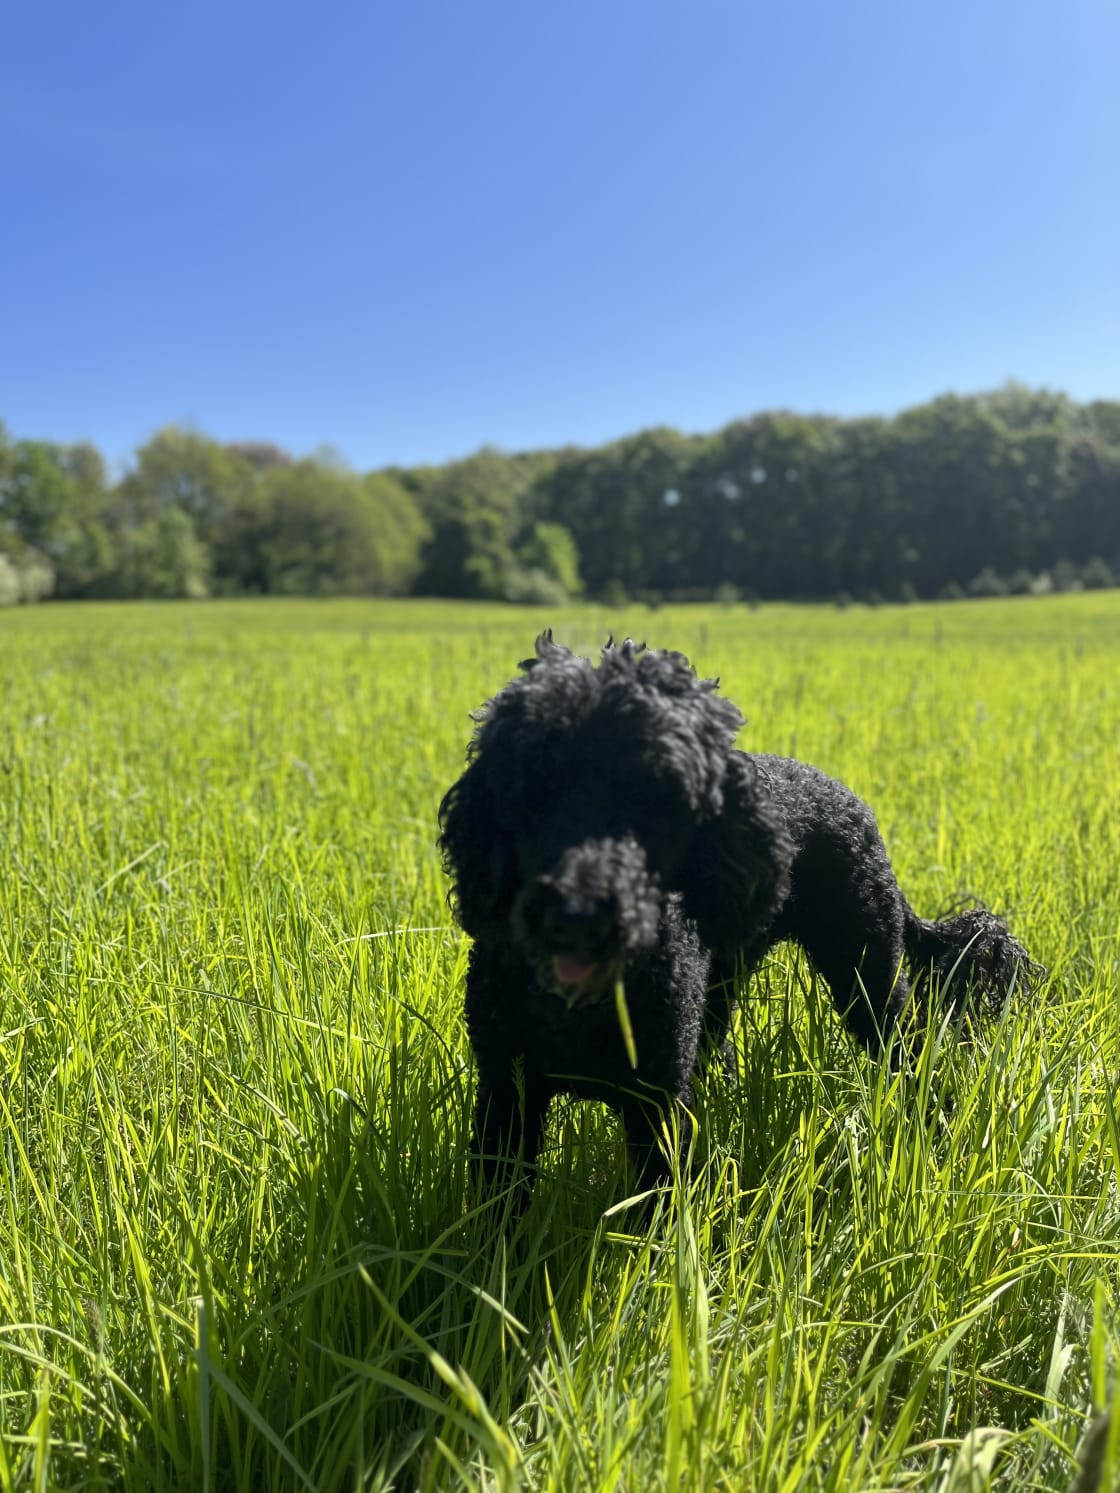 Our Dog enjoying the fields